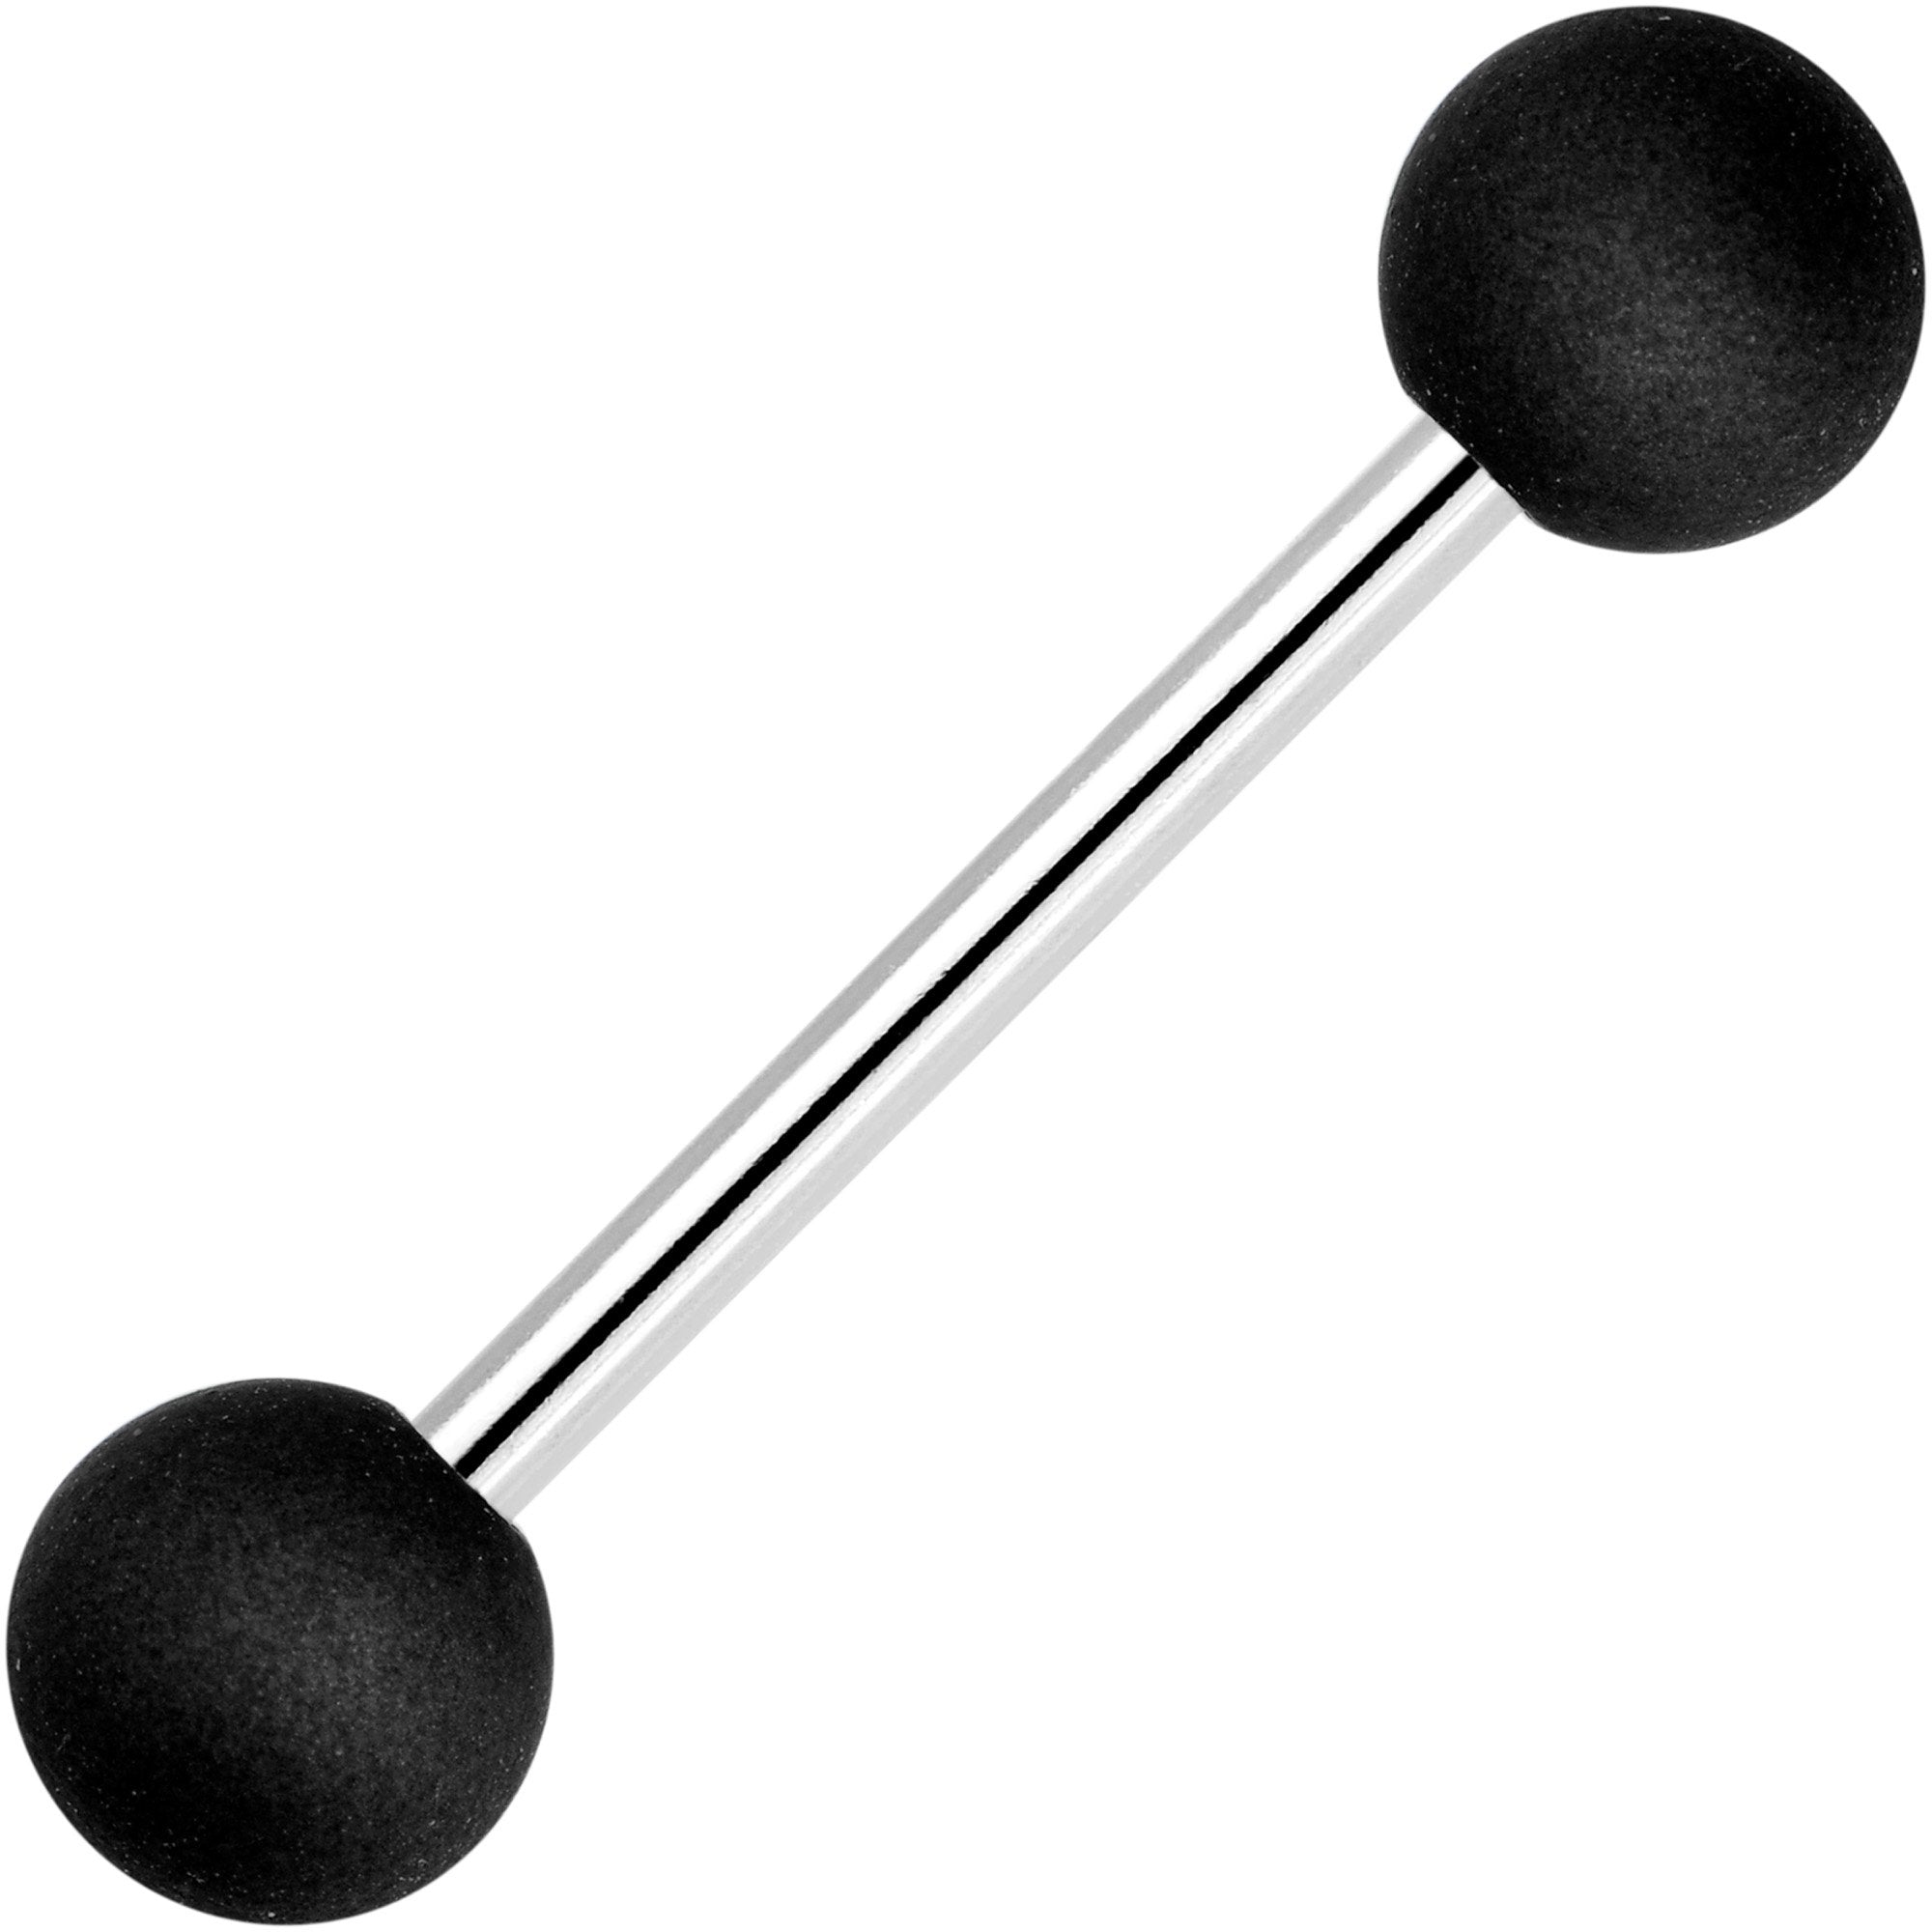 Black Silicone Coated Acrylic Ball End Barbell Tongue Ring